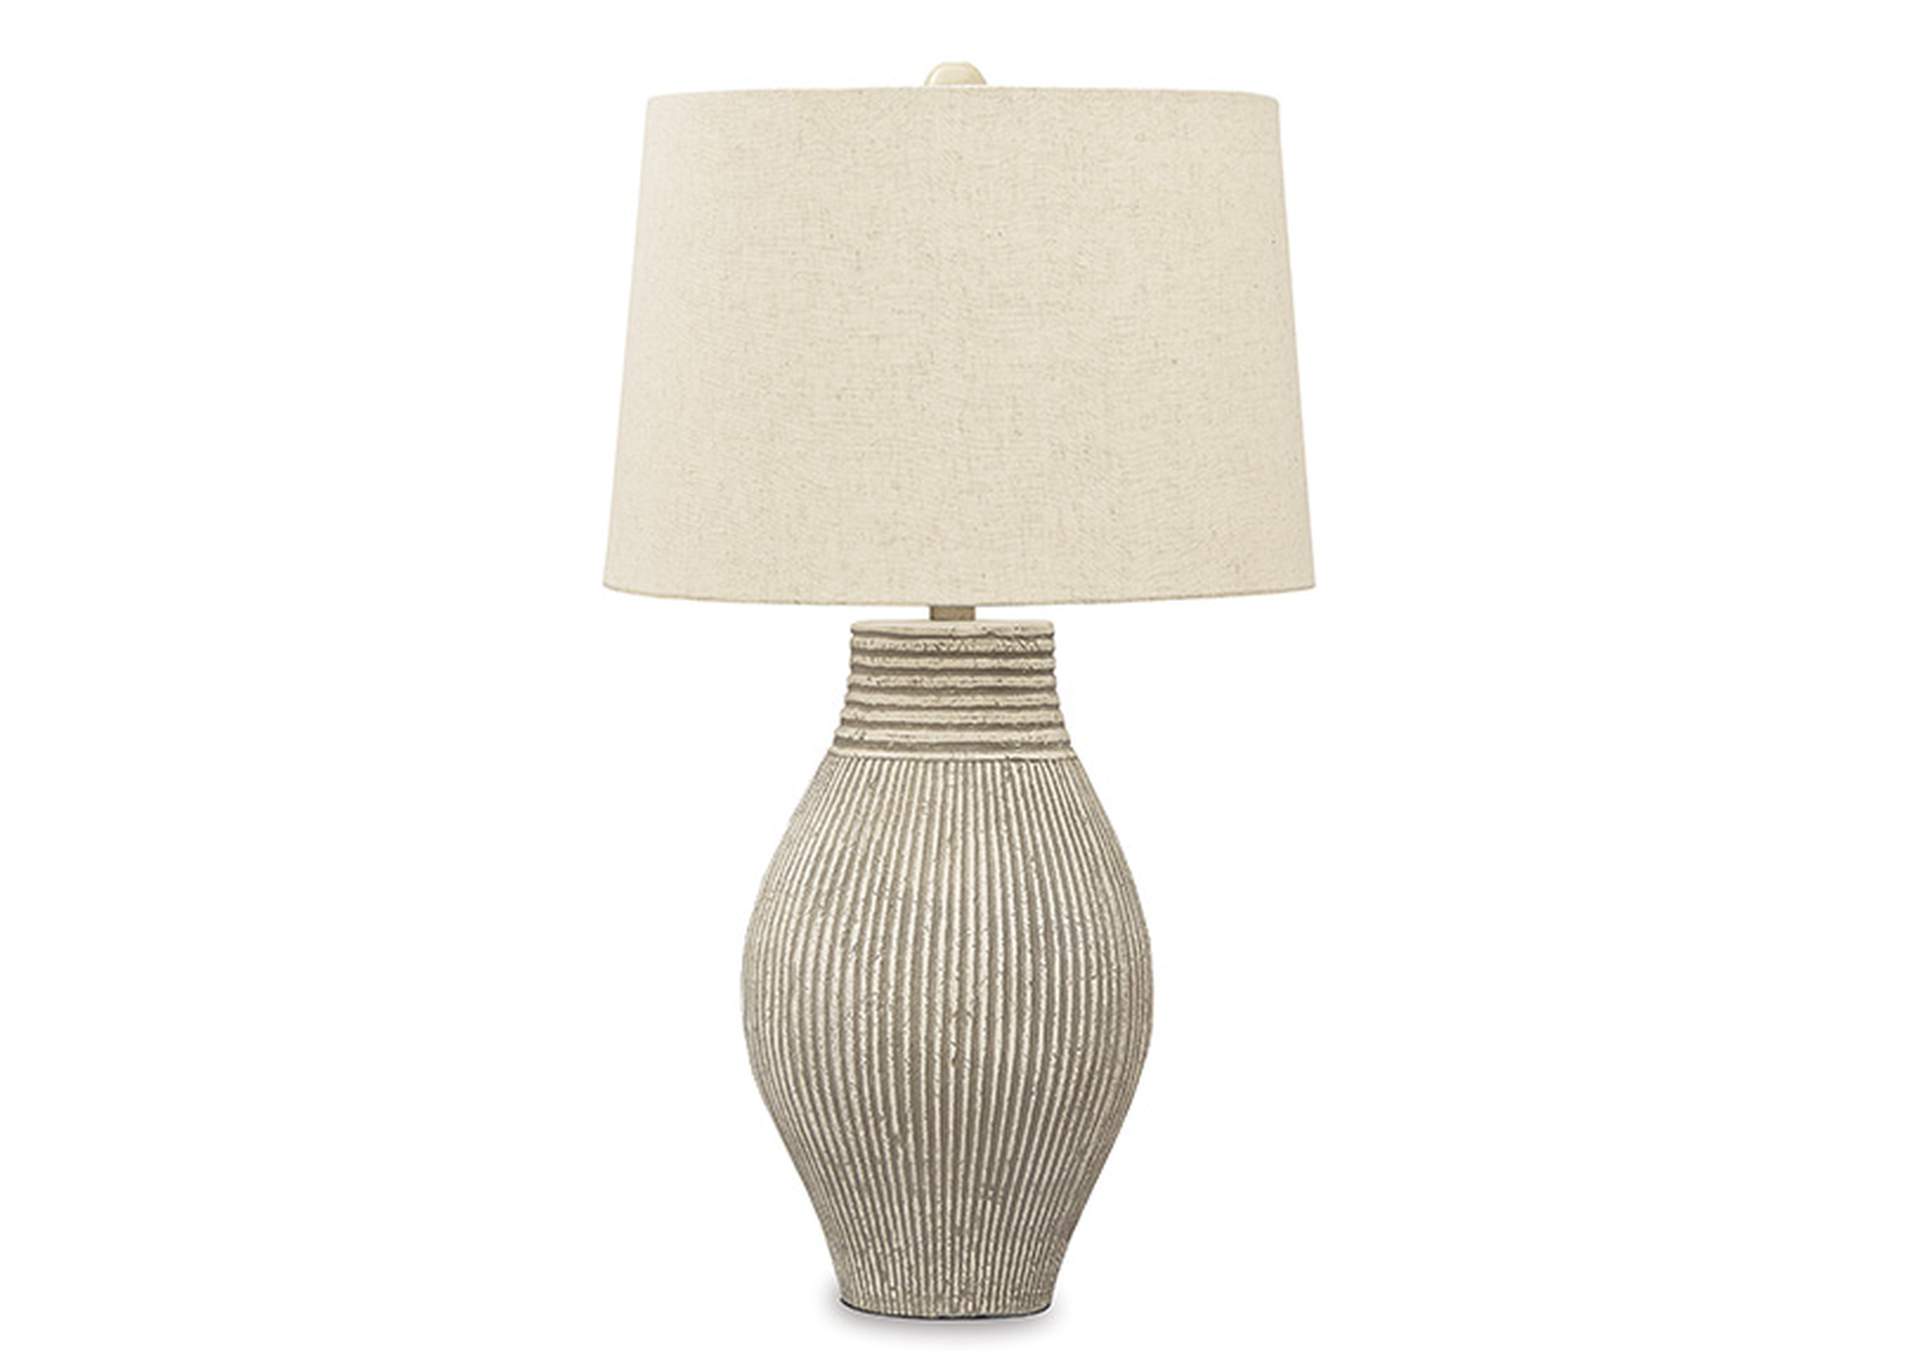 Layal Table Lamp,Signature Design By Ashley